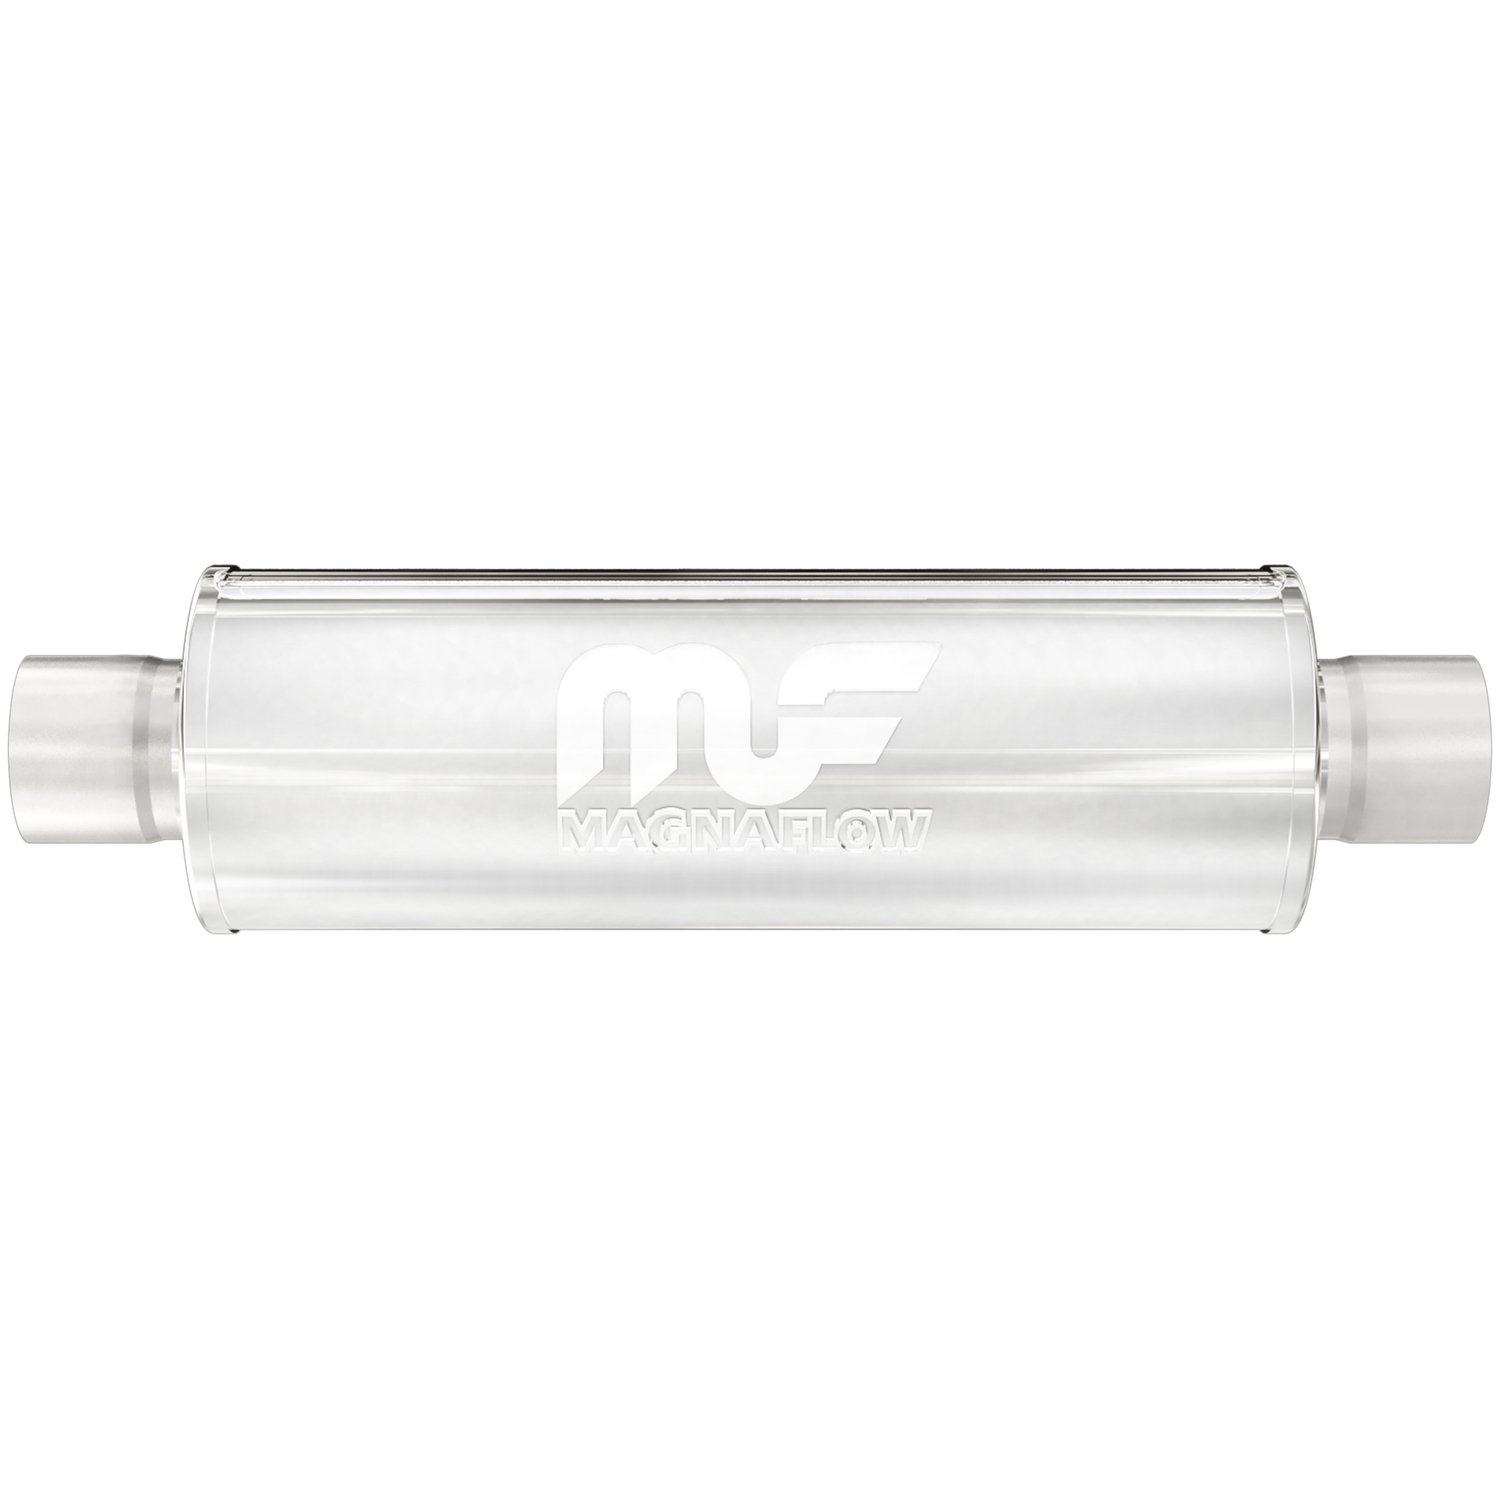 4" Round Muffler Center In/Center Out: 2" Body Length: 14" Overall Length: 20" Core Size: 2" Satin Finish